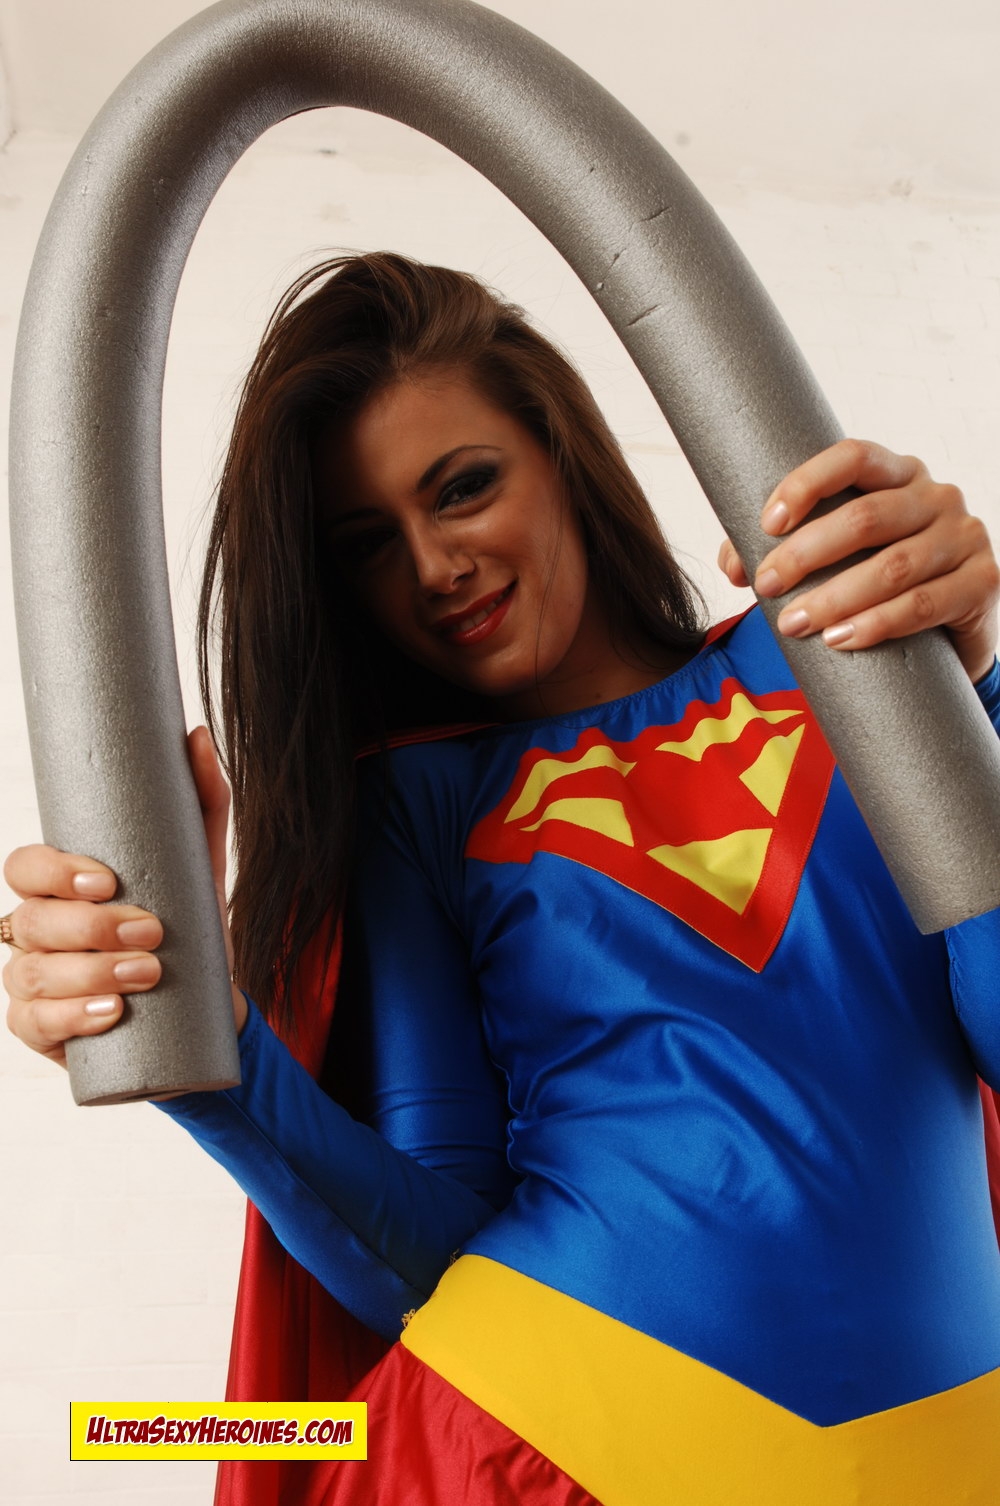 [UltraSexyHeroines] Super Heroine Cosplay Nude - Holly 79